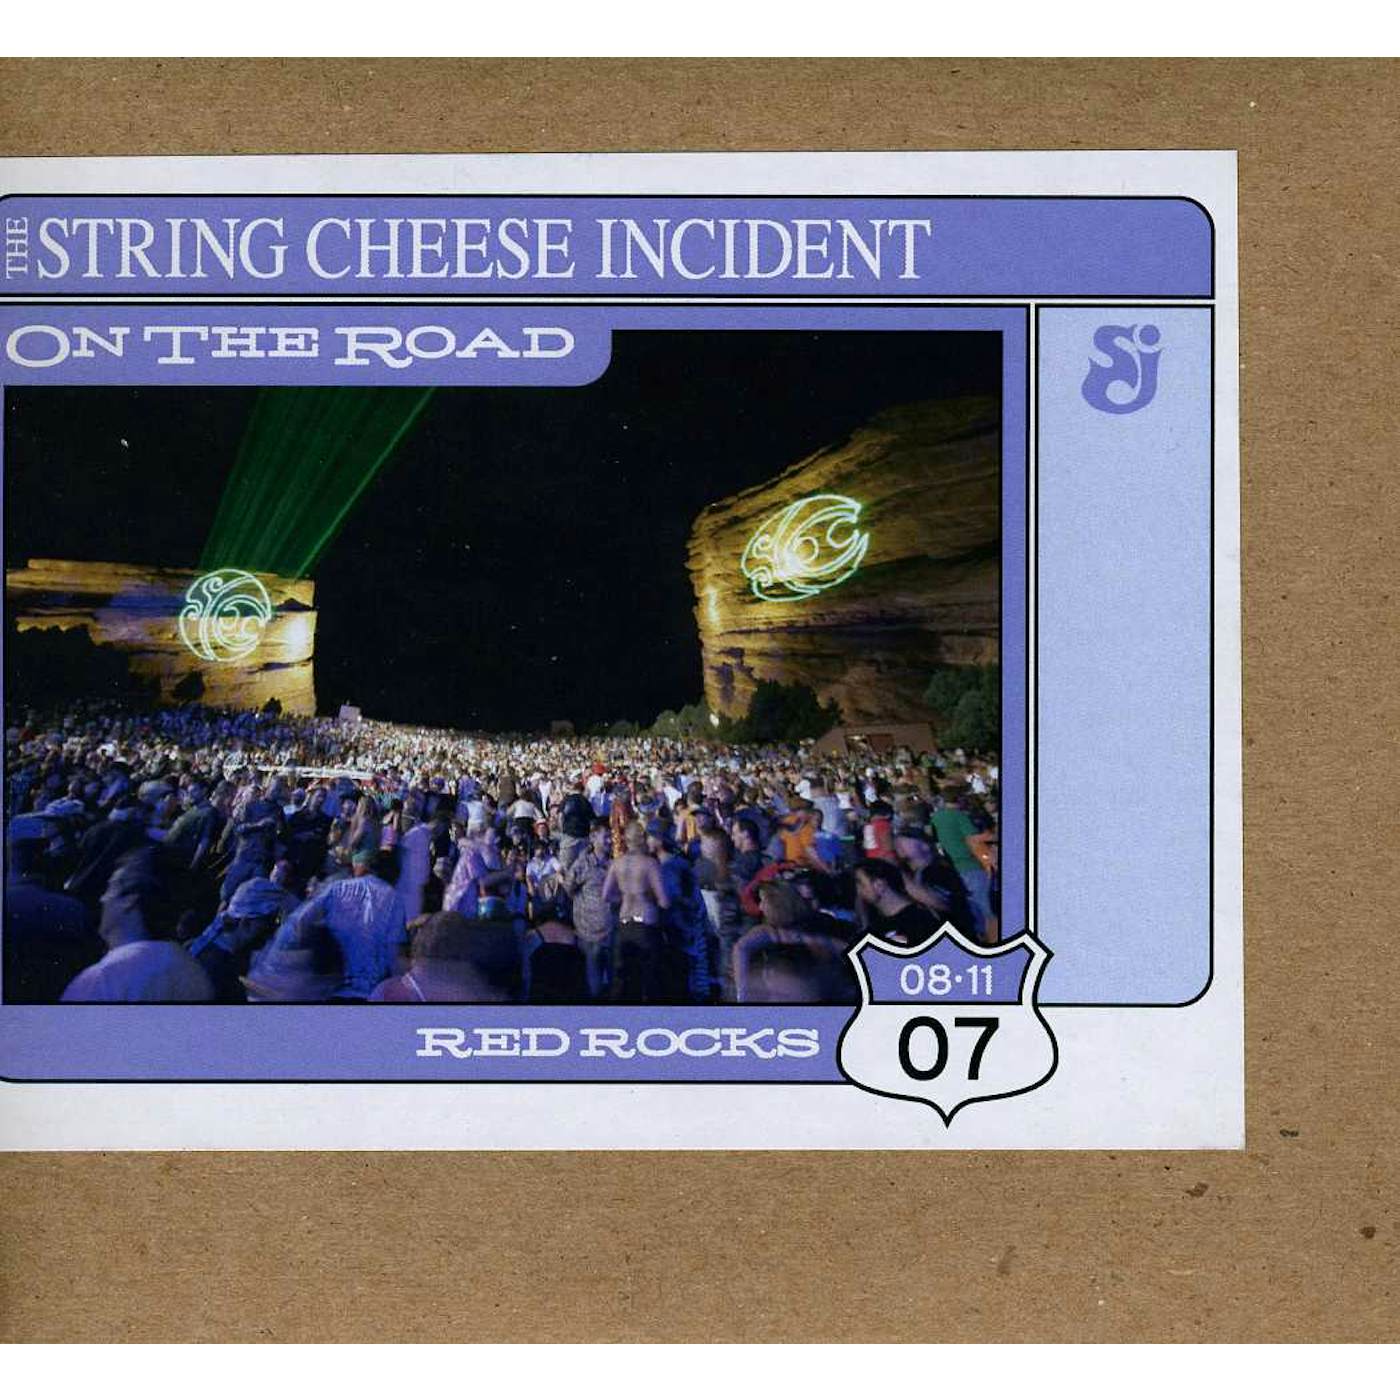 The String Cheese Incident OTR: MORRISON CO 8-11-07 CD